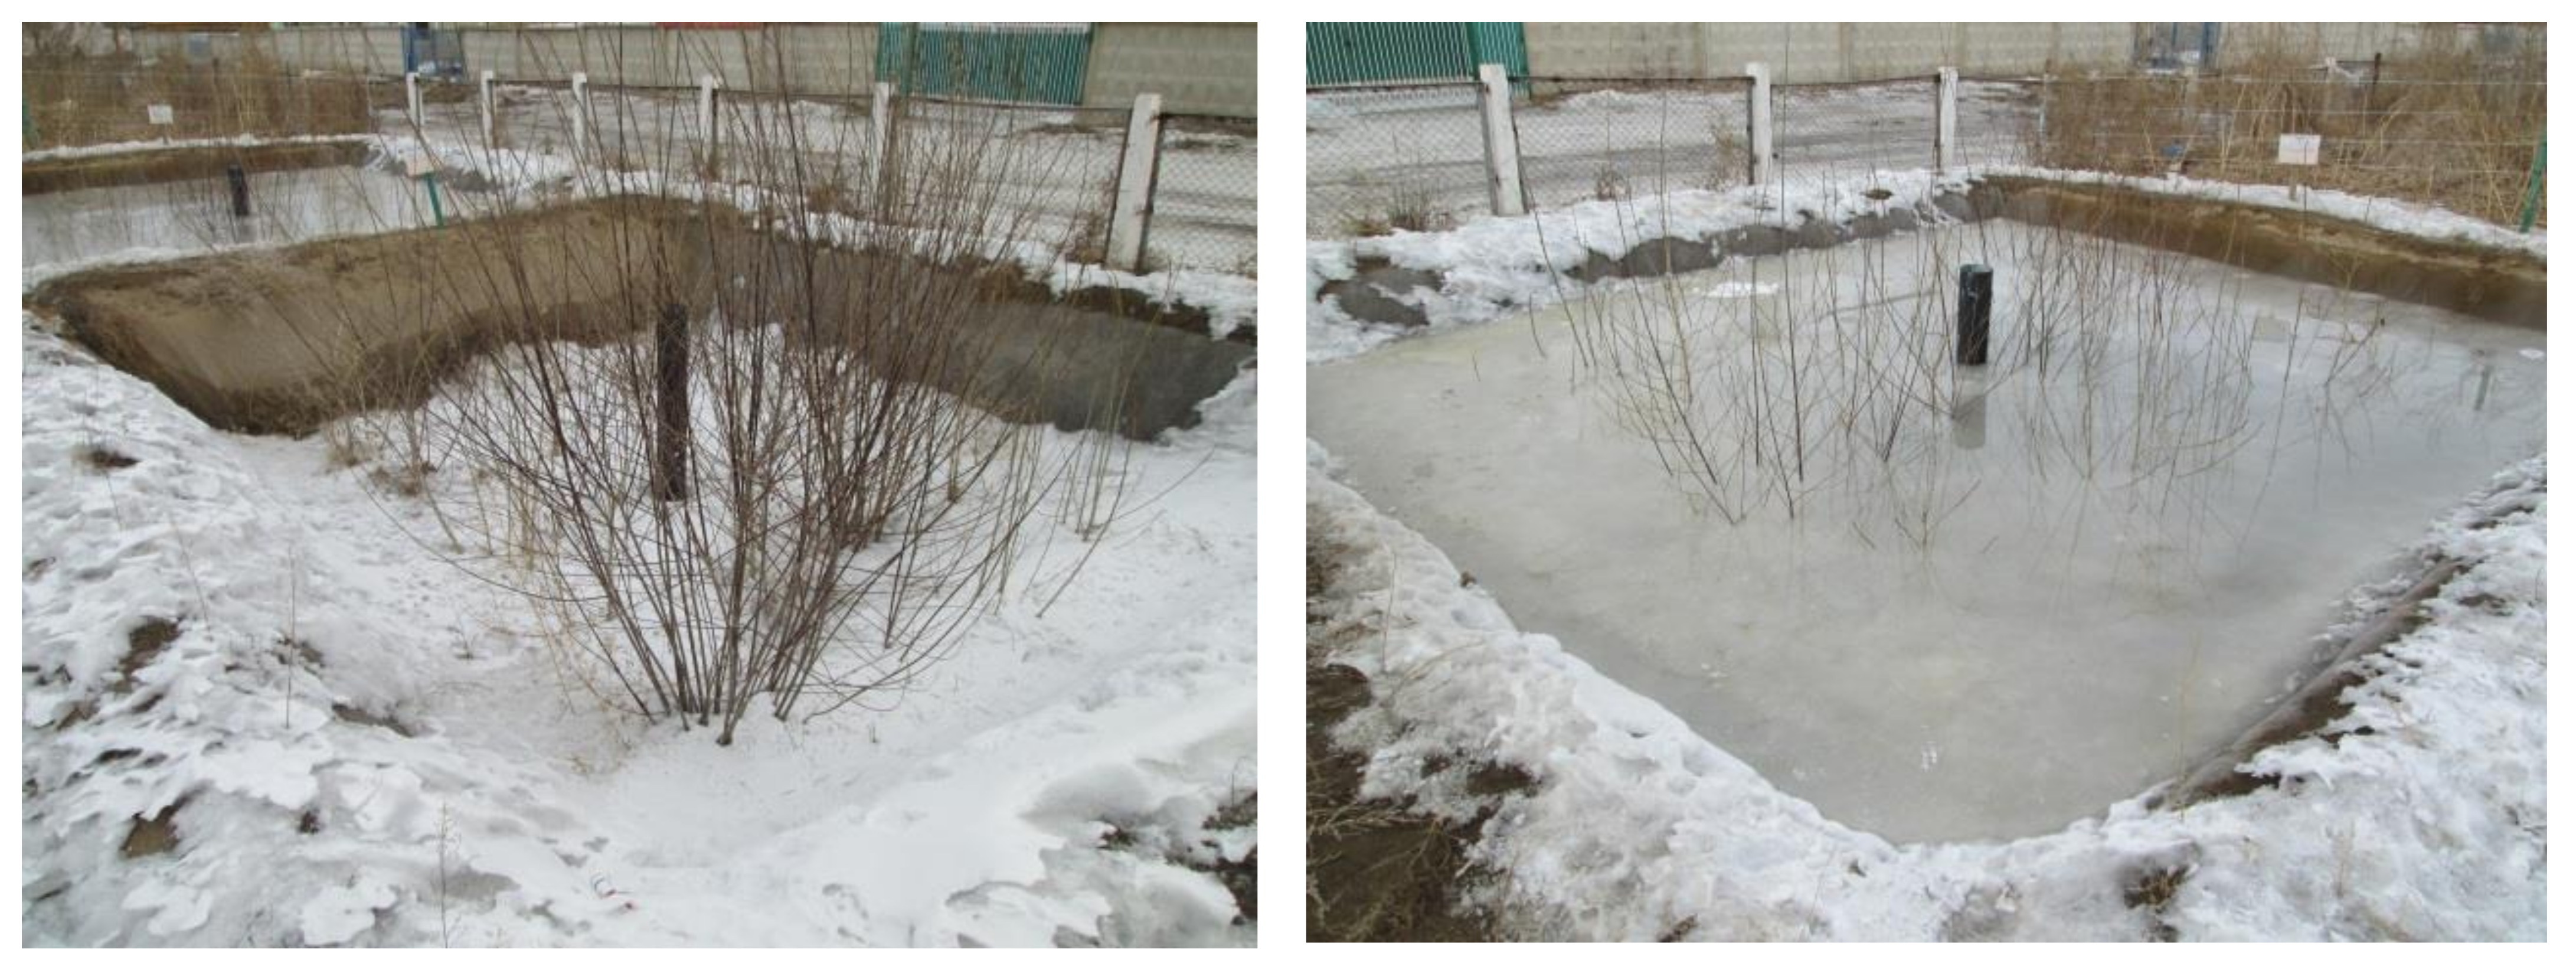 Water | Free Full-Text | Wastewater Treatment and Wood Production of Willow  System in Cold Climate | HTML